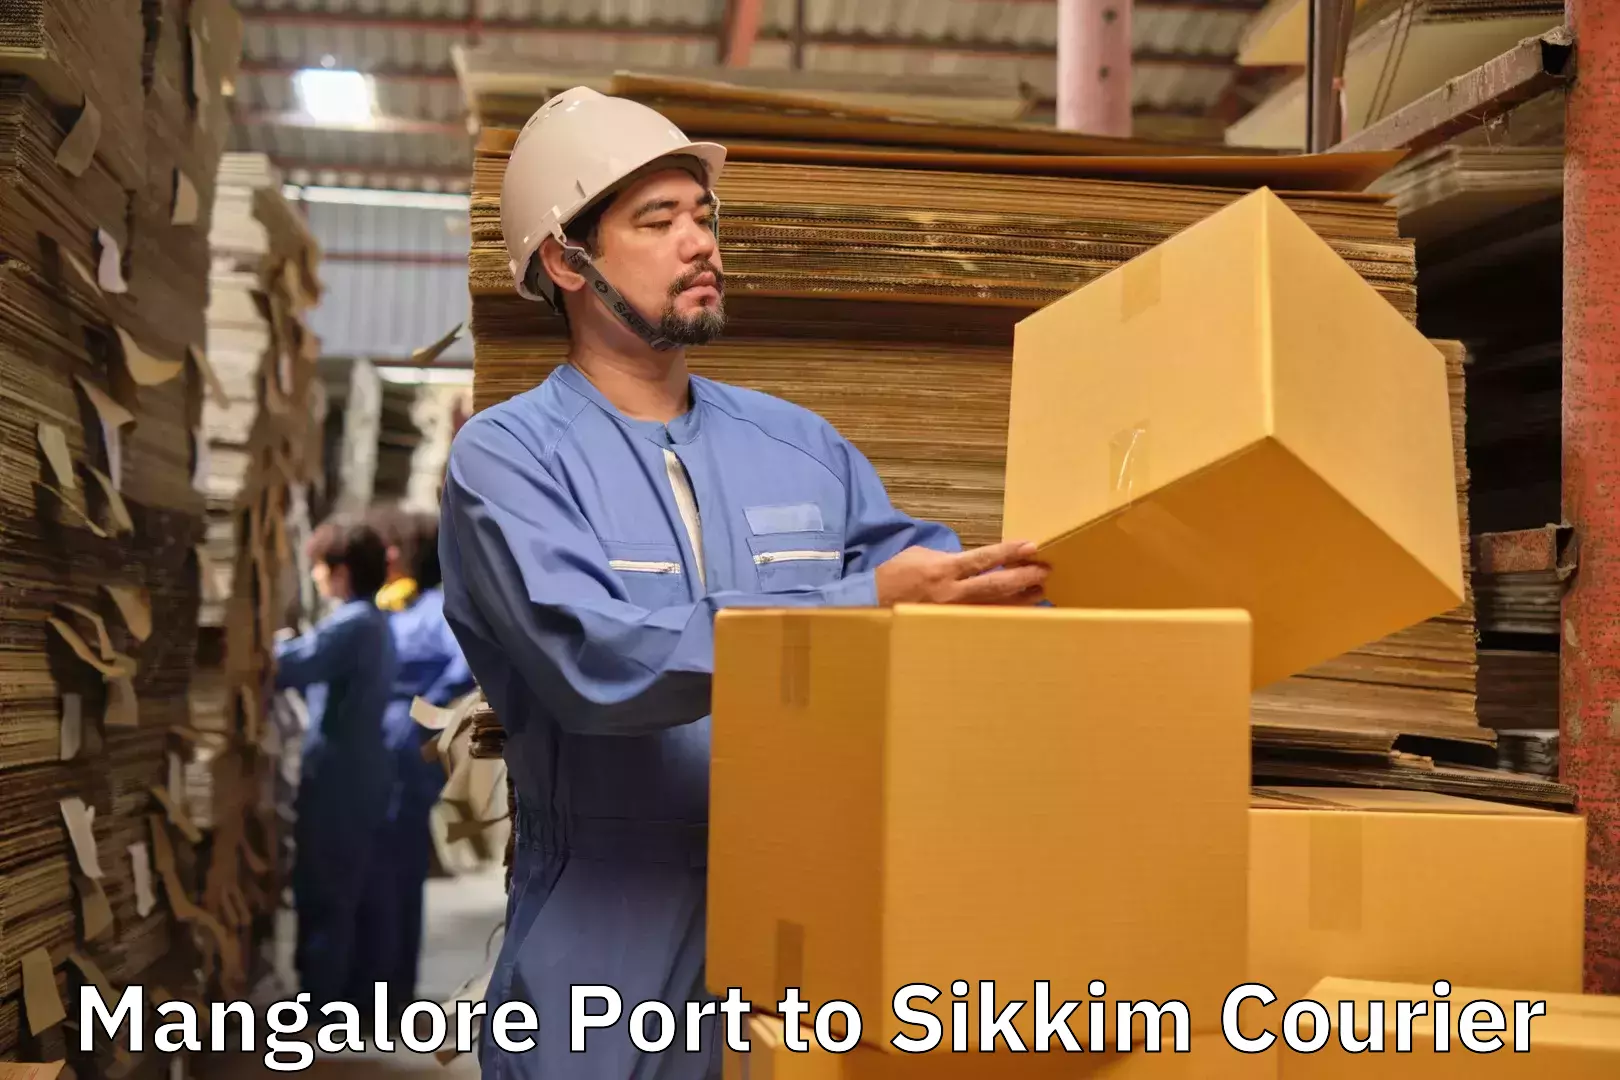 Luggage delivery network Mangalore Port to South Sikkim